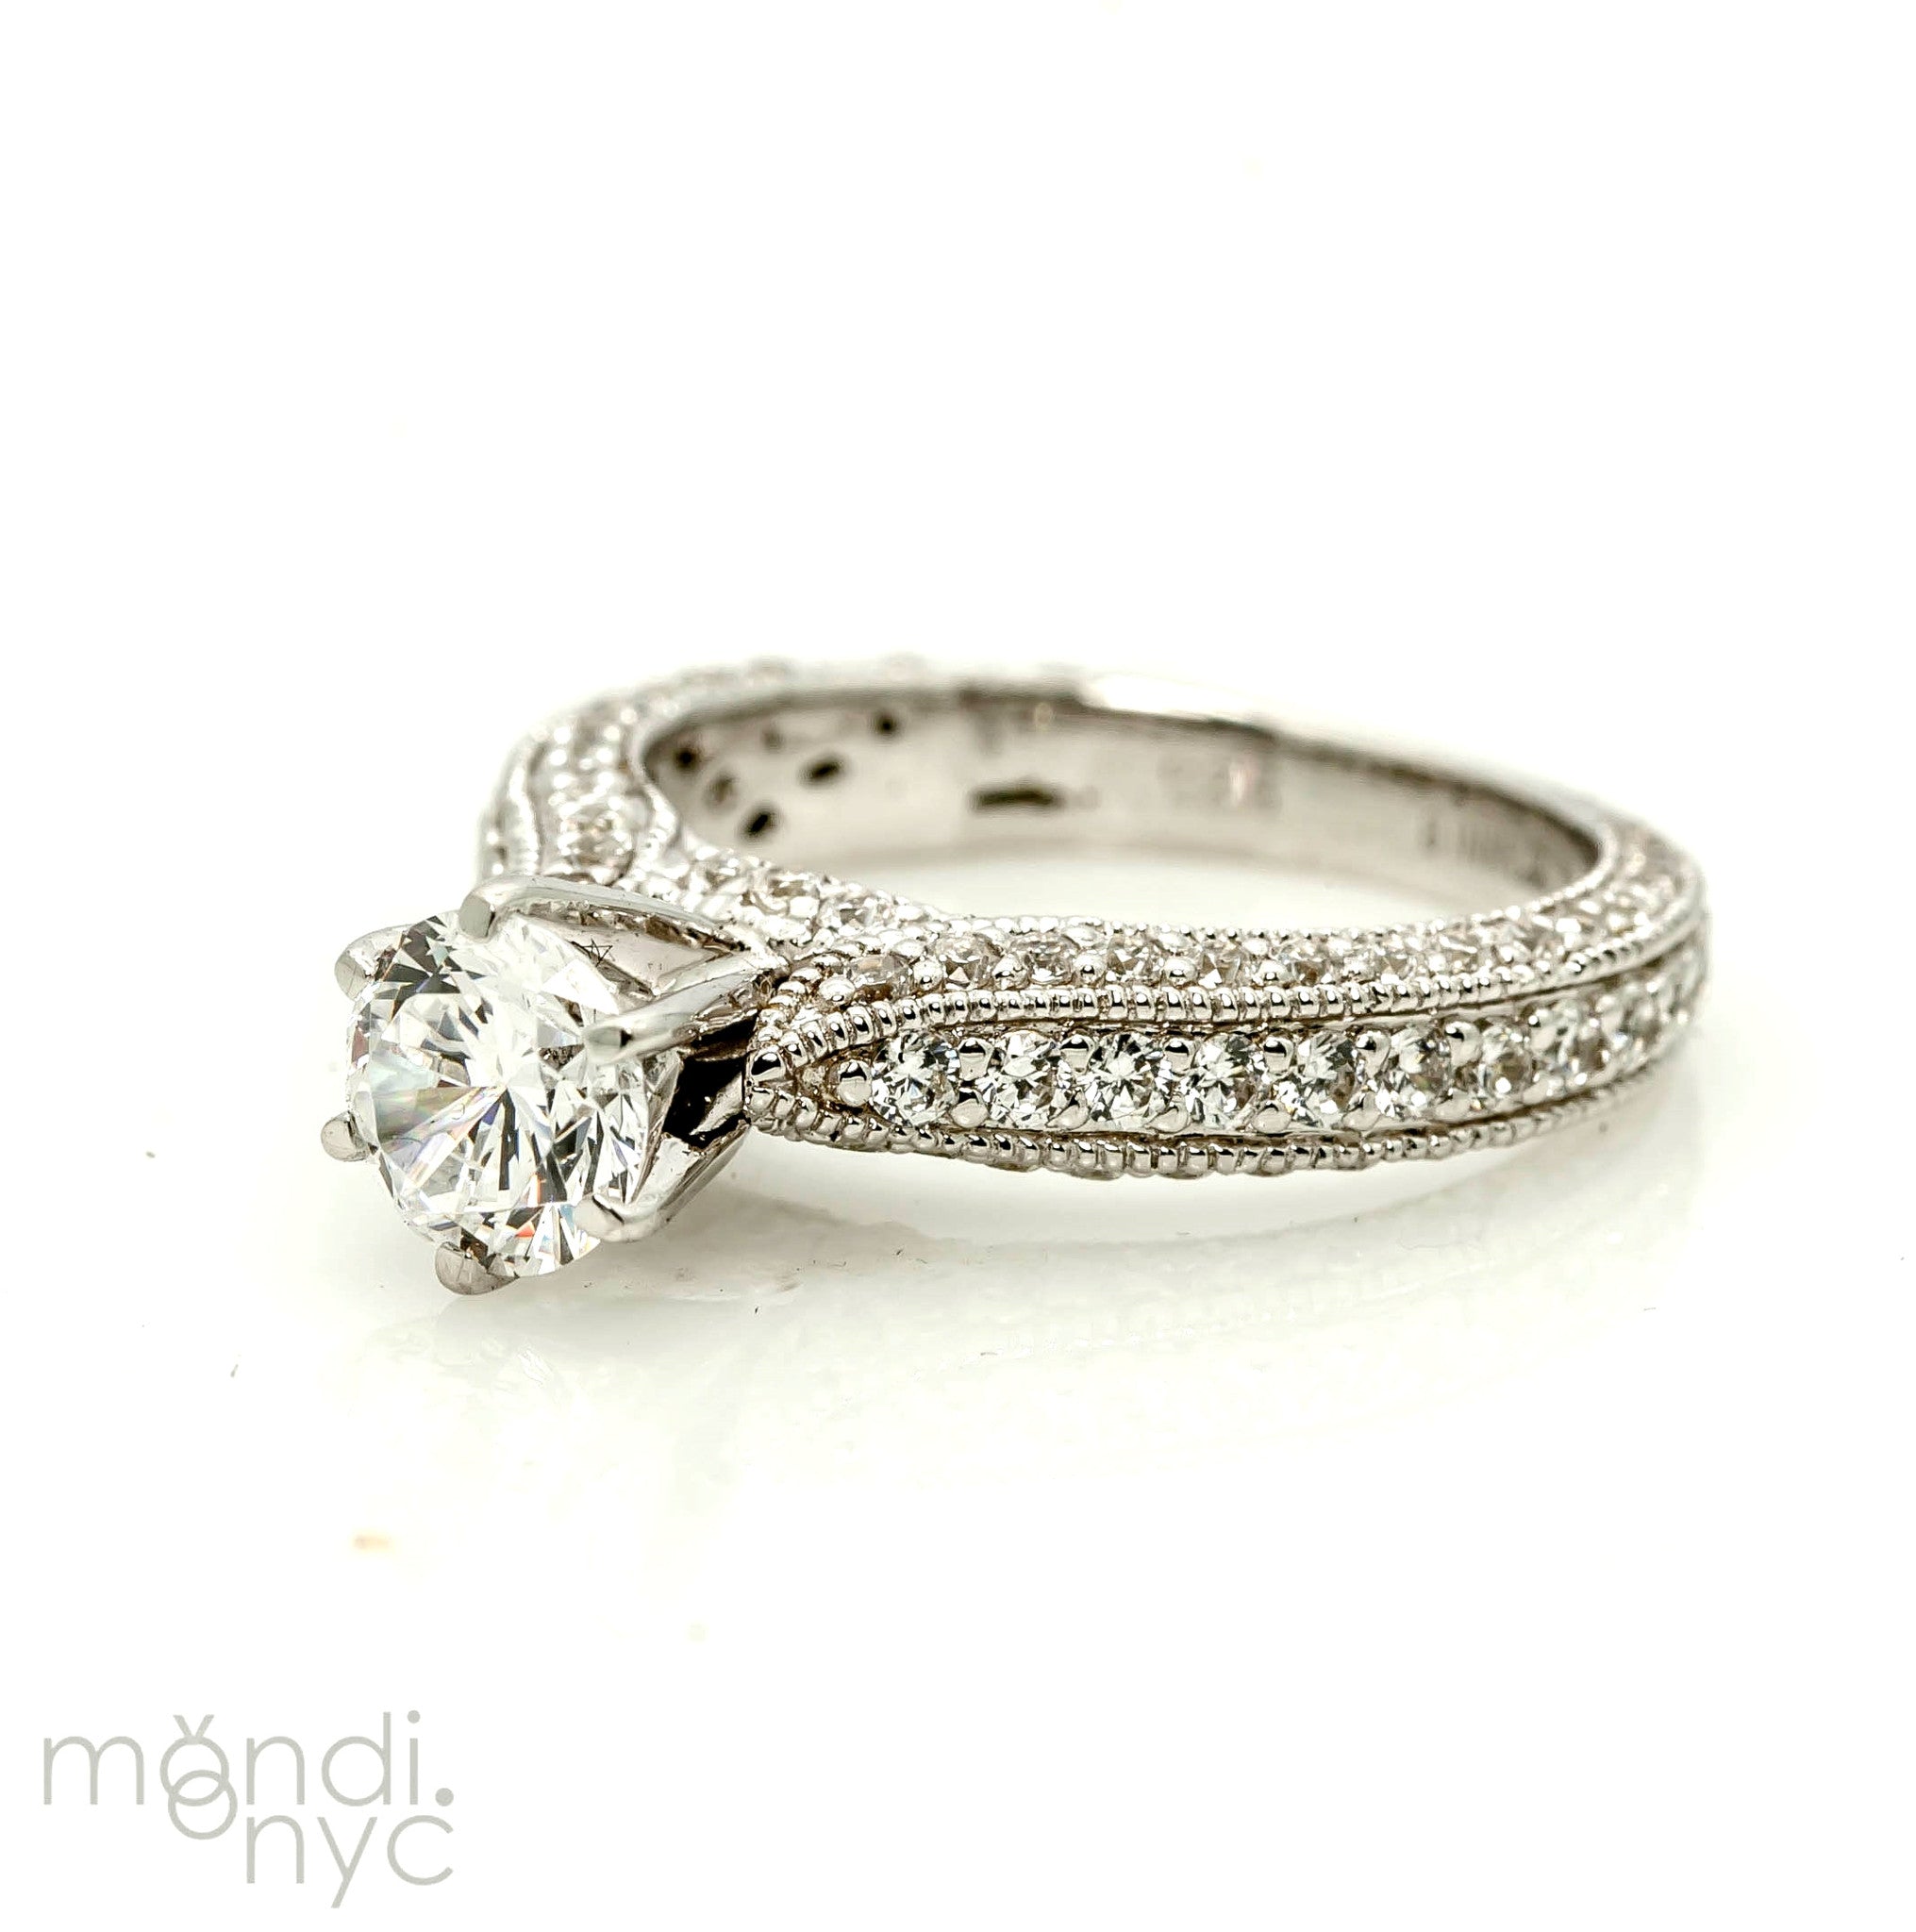 Semi Mount, Art Deco Style Engagement Ring, For 1 Carat Center Stone, With 1.07 Carat Of Diamonds, Anniversary Ring - Y11302